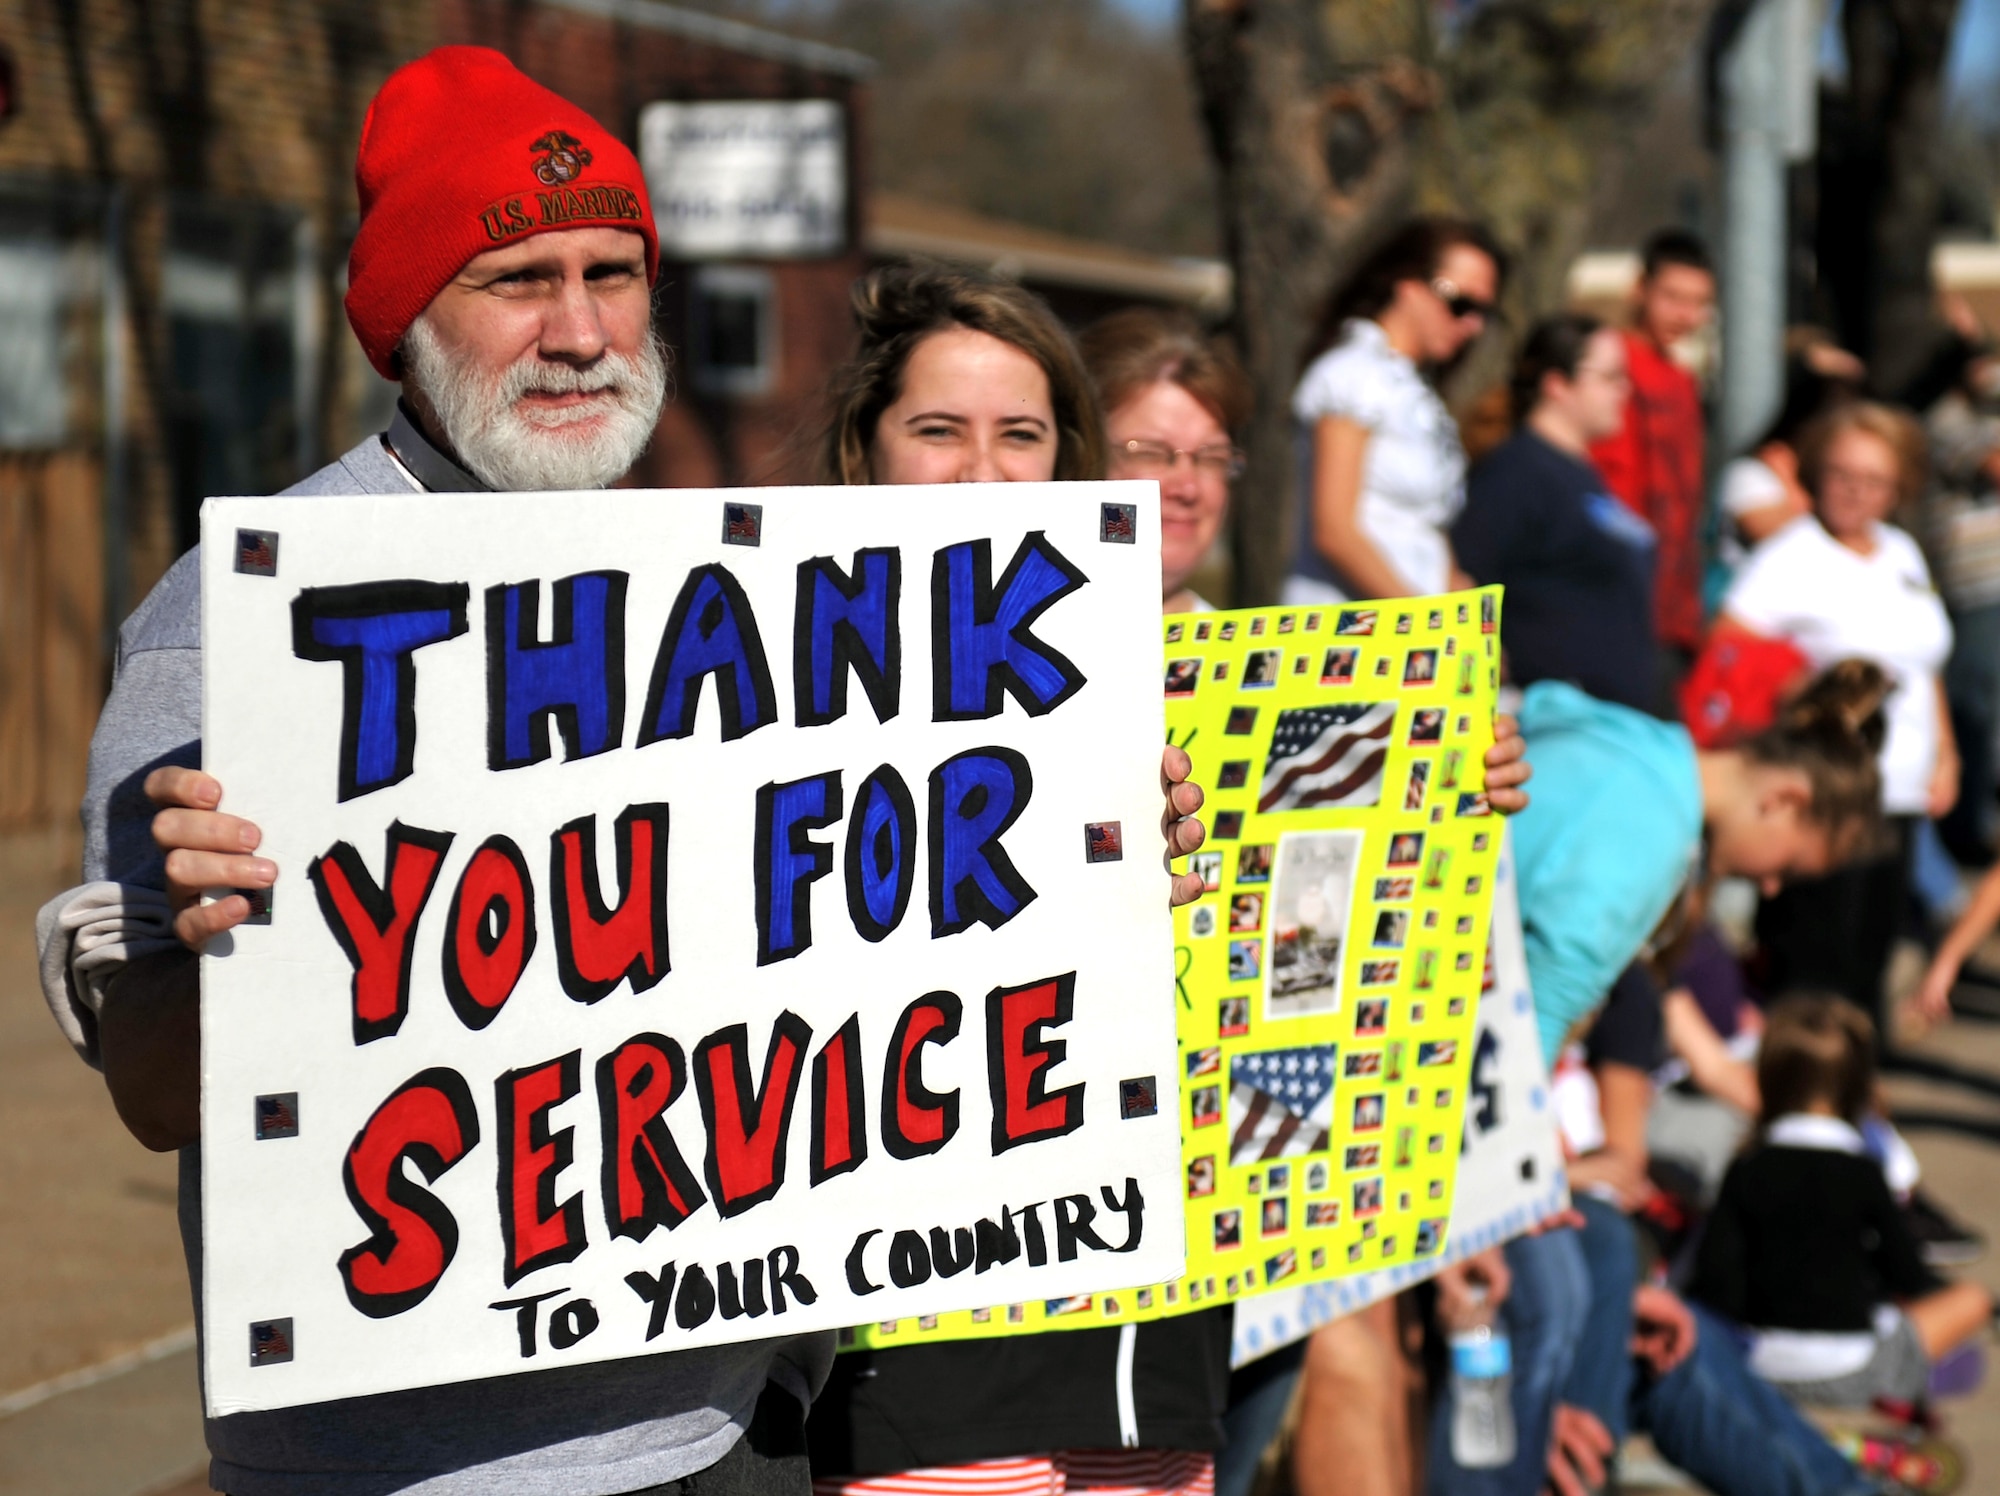 Jim Strawn, a retired U.S. Marine, displays a thank you sign to show his gratitude in the 2012 Veterans Day parade in Bellevue, Neb. Nov. 10. This is the official Veterans Day parade for the state of Nebraska. (U.S. Air Force photo by Jeff W. Gates/Released)